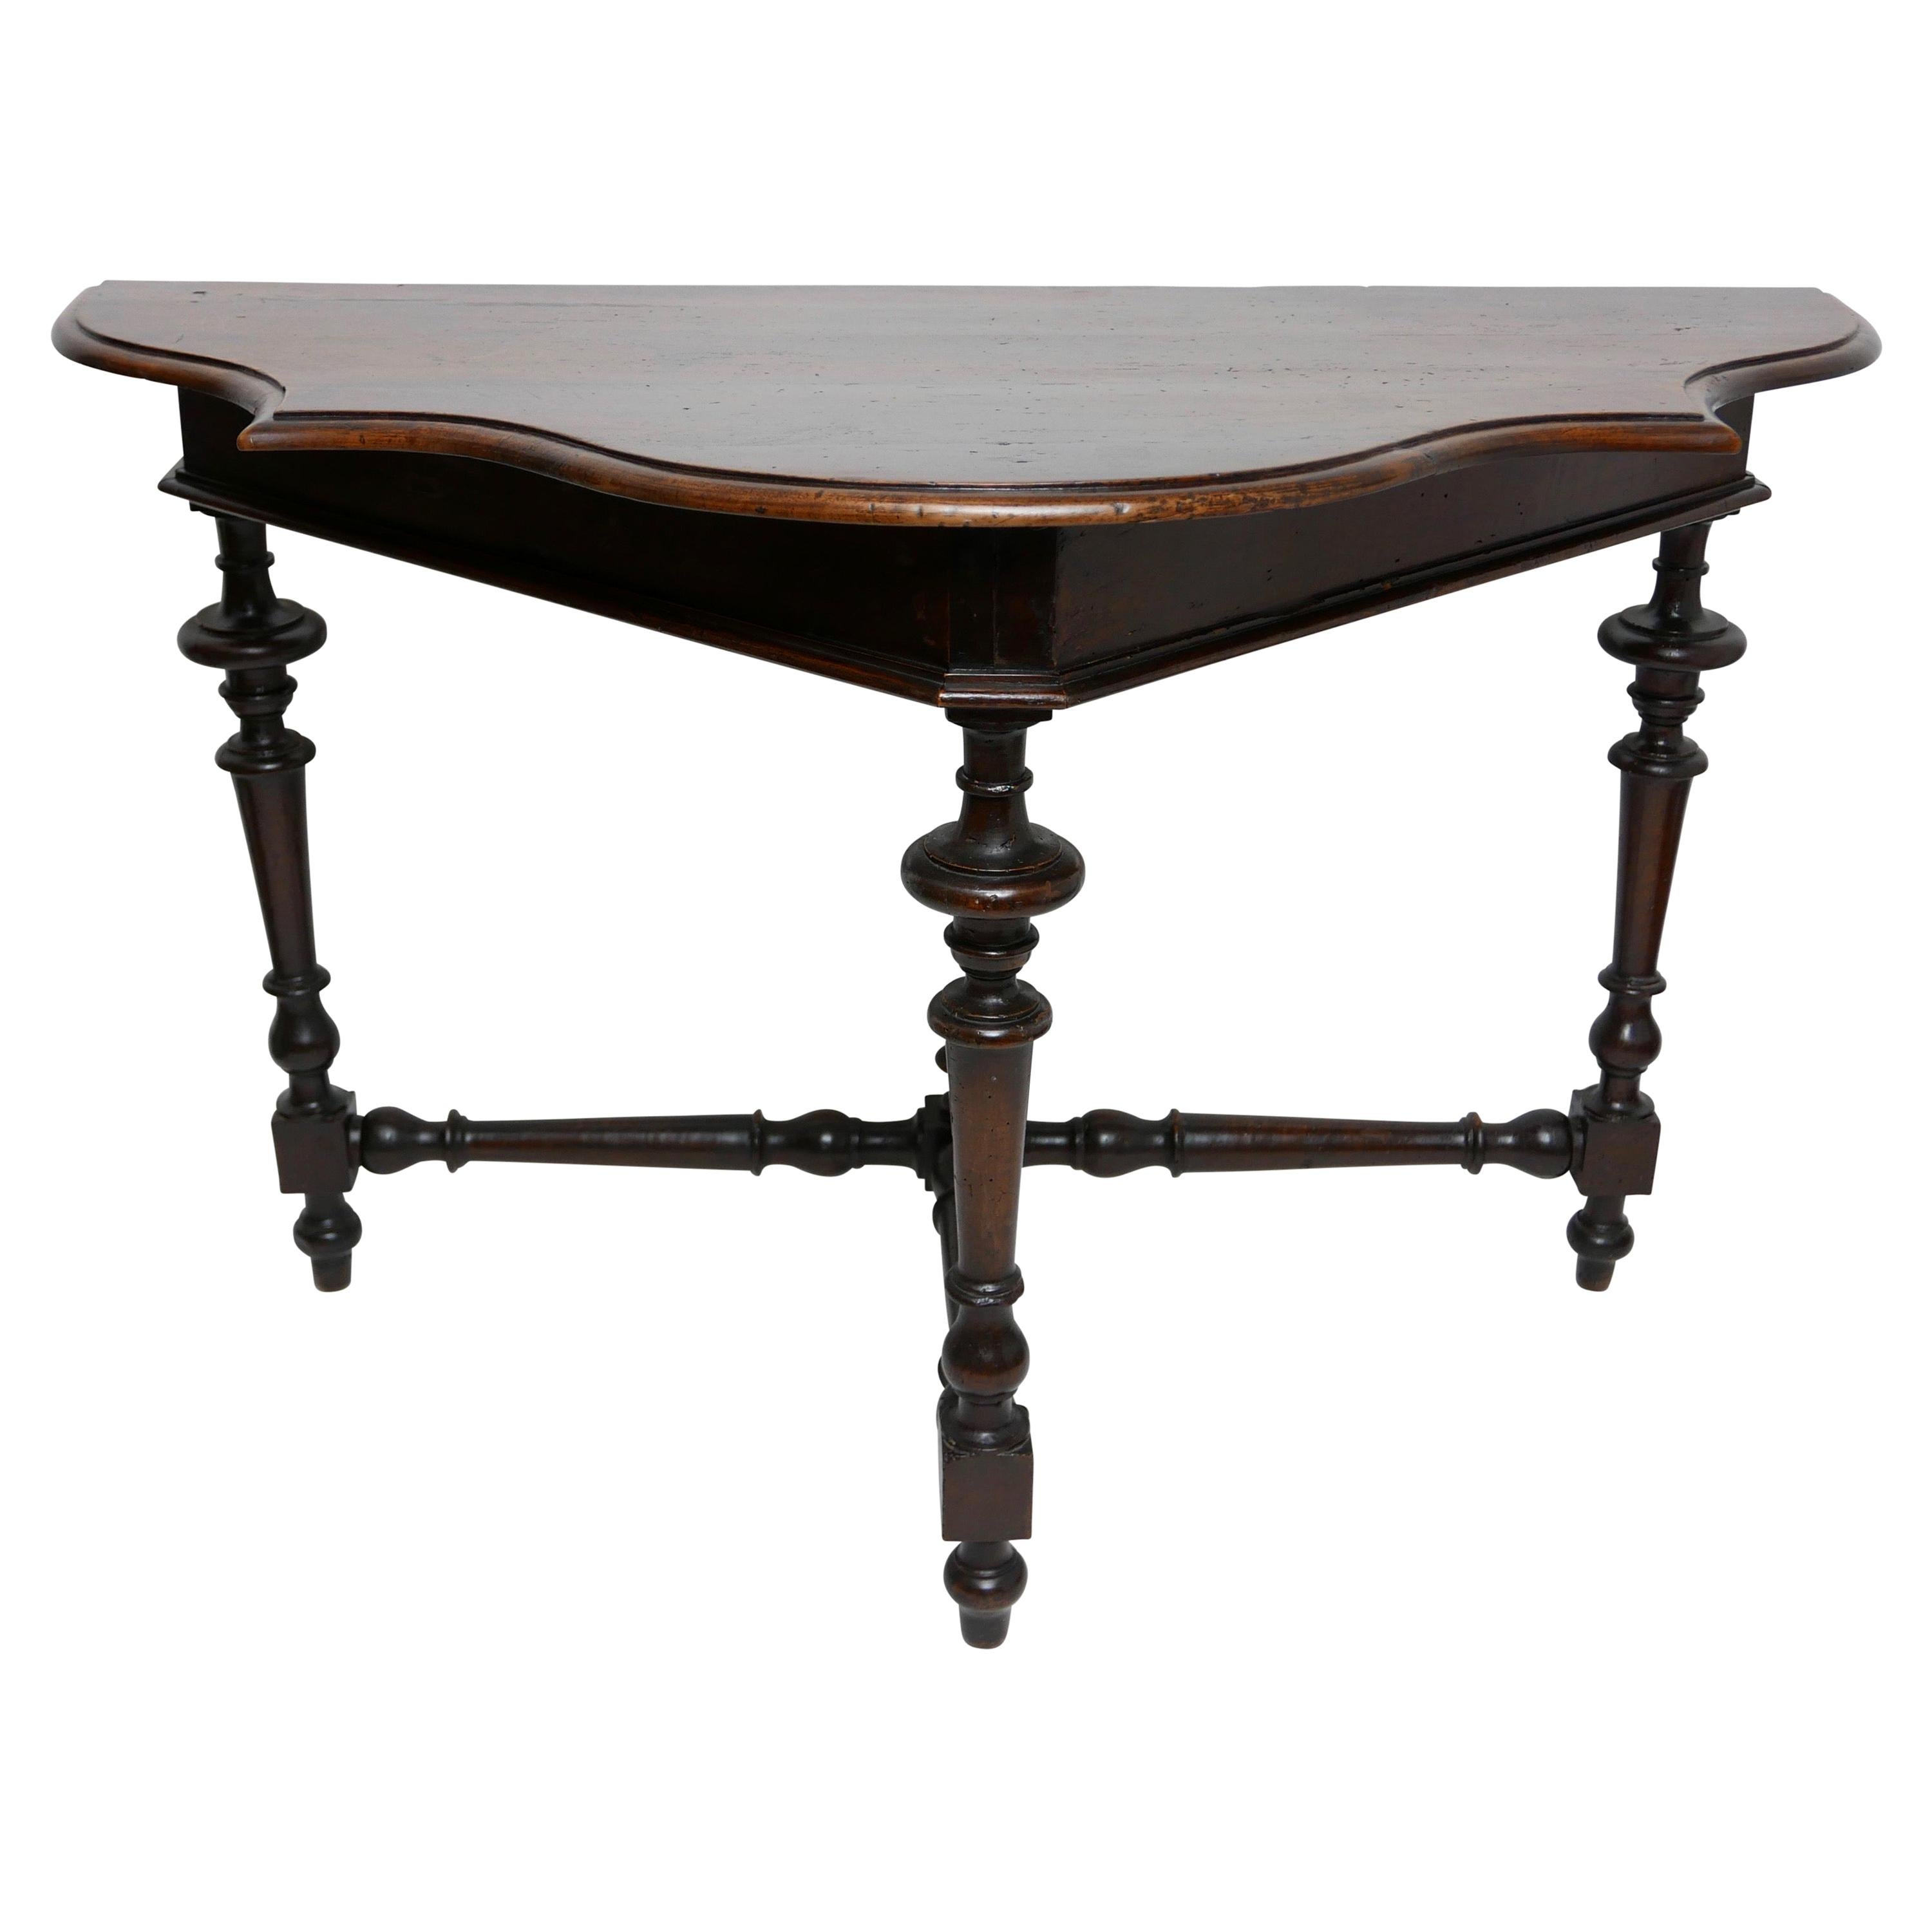 Northern Italian Walnut Console Table, Early 19th Century For Sale